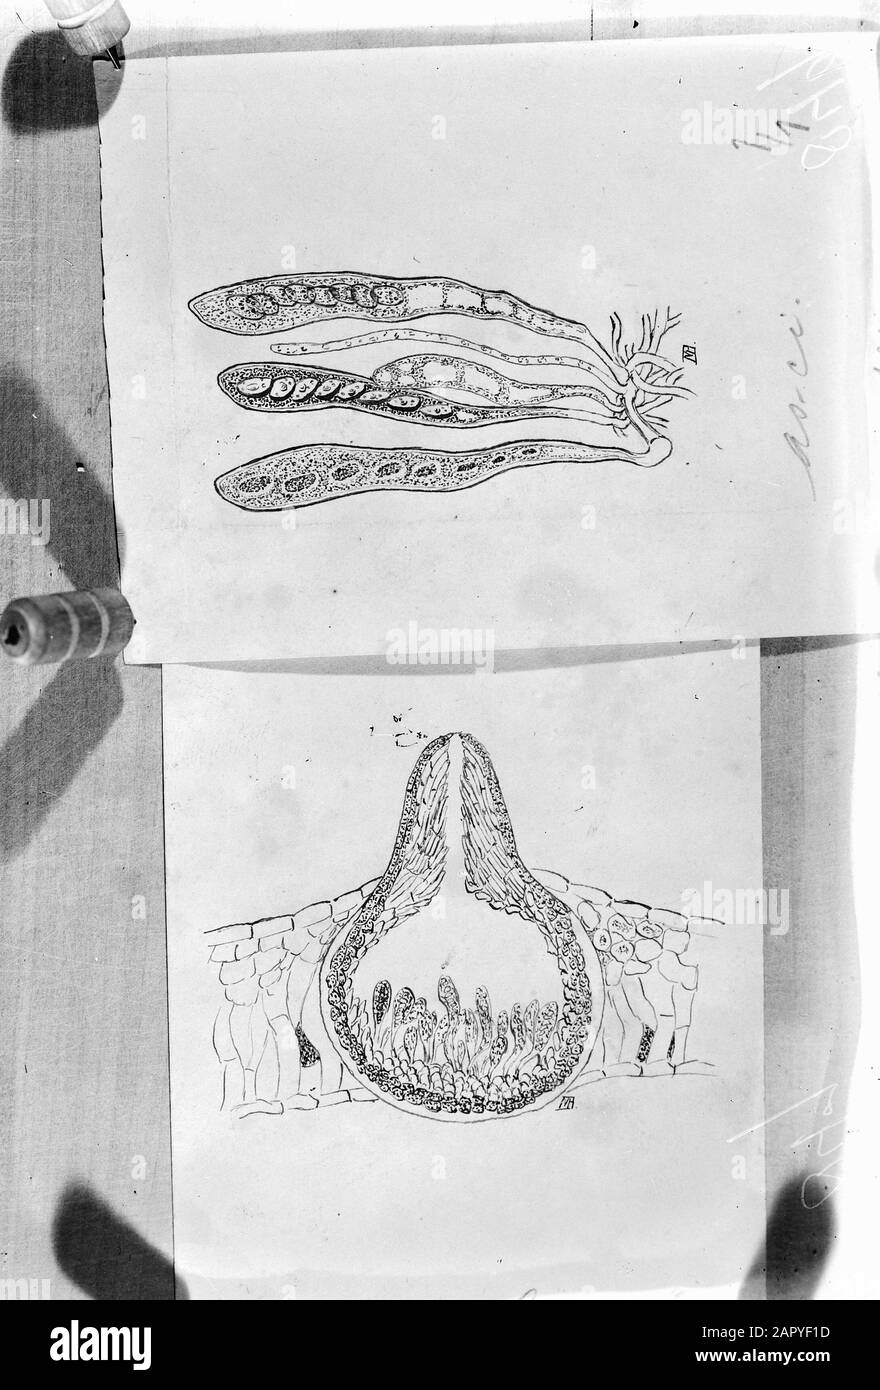 drawings, perithecium, asci Date: undated Location: Netherlands Keywords: drawings Personal name: asci, perithecium Stock Photo